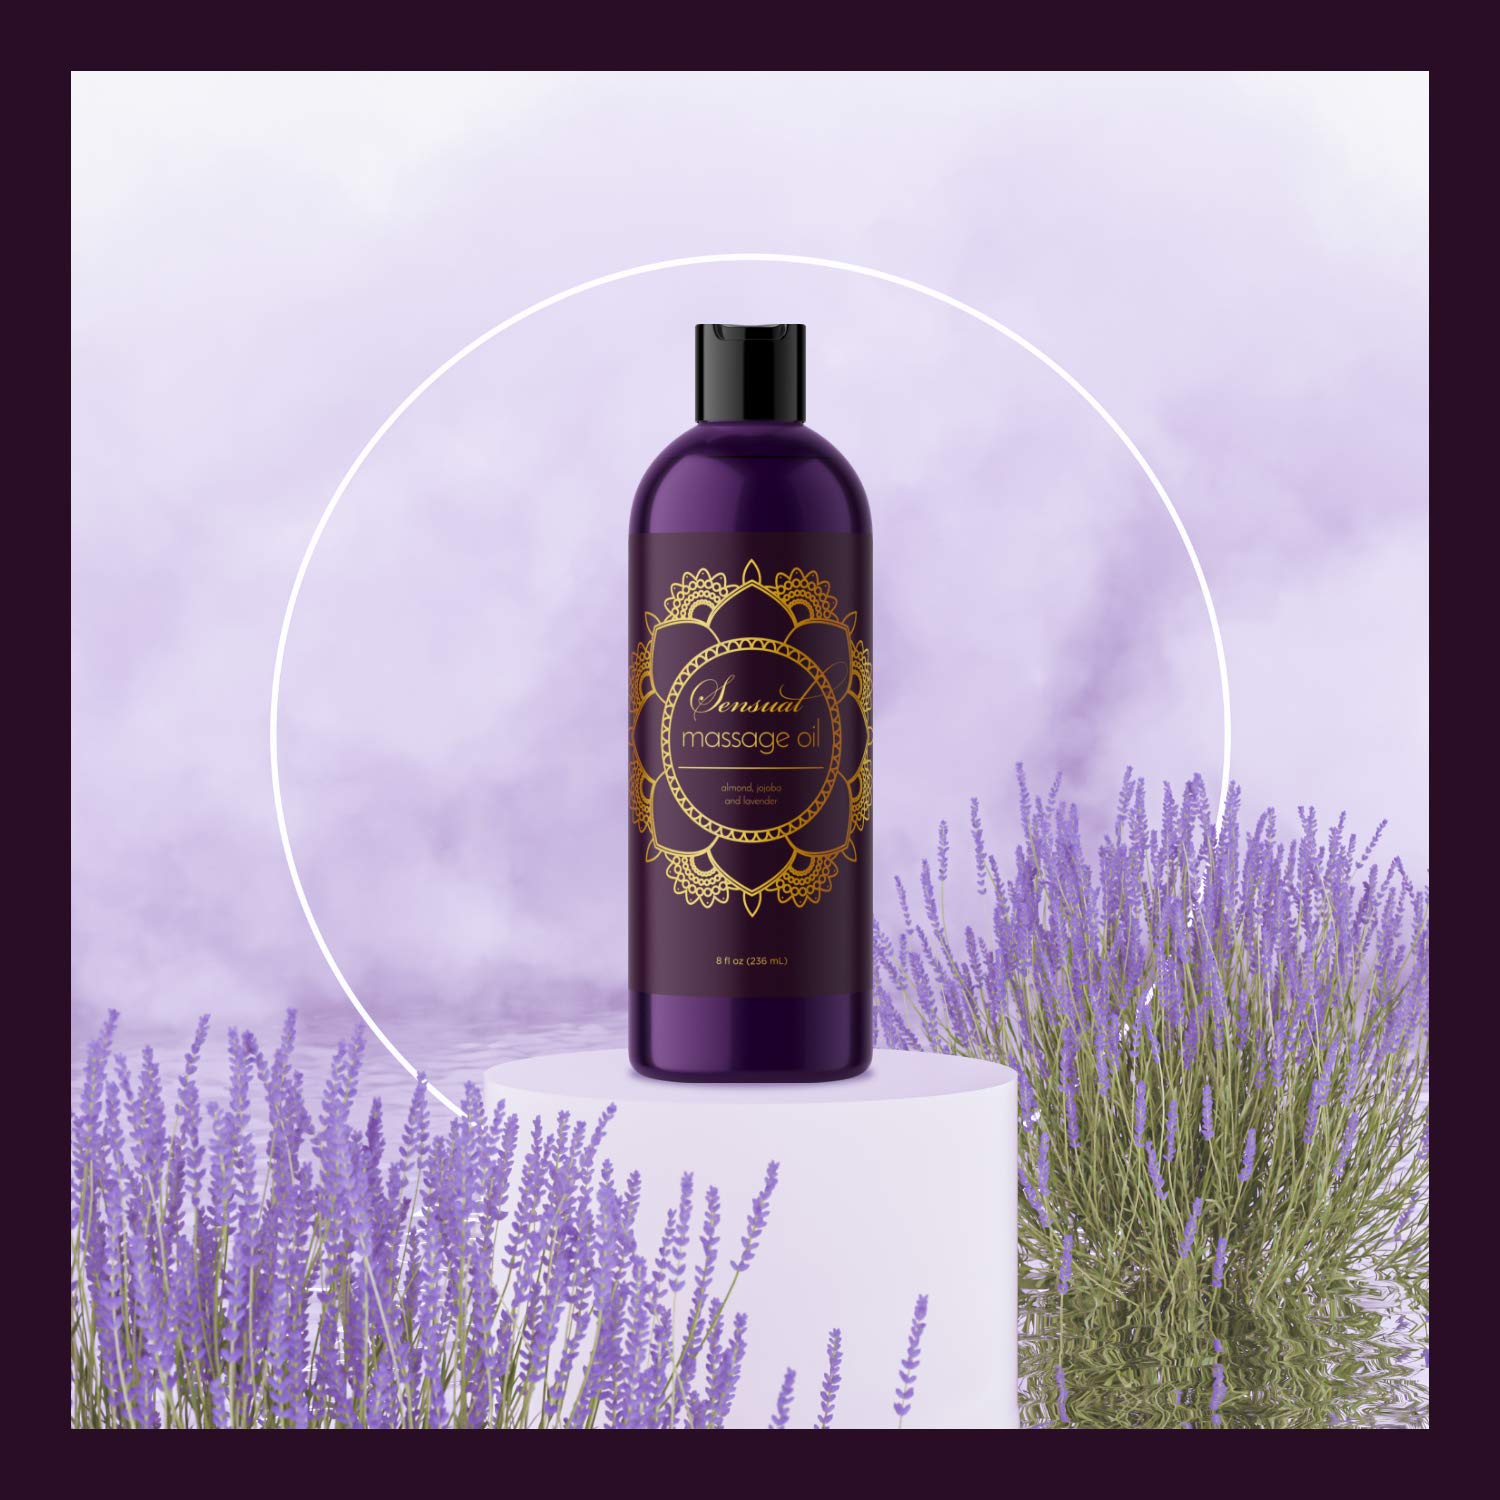 Aromatherapy Sensual Massage Oil for Couples - Relaxing Full Body Massage Oil for Date Night with Sweet Almond Oil - Vegan Lavender Massage Oil for Massage Therapy Smooth Gliding Formula